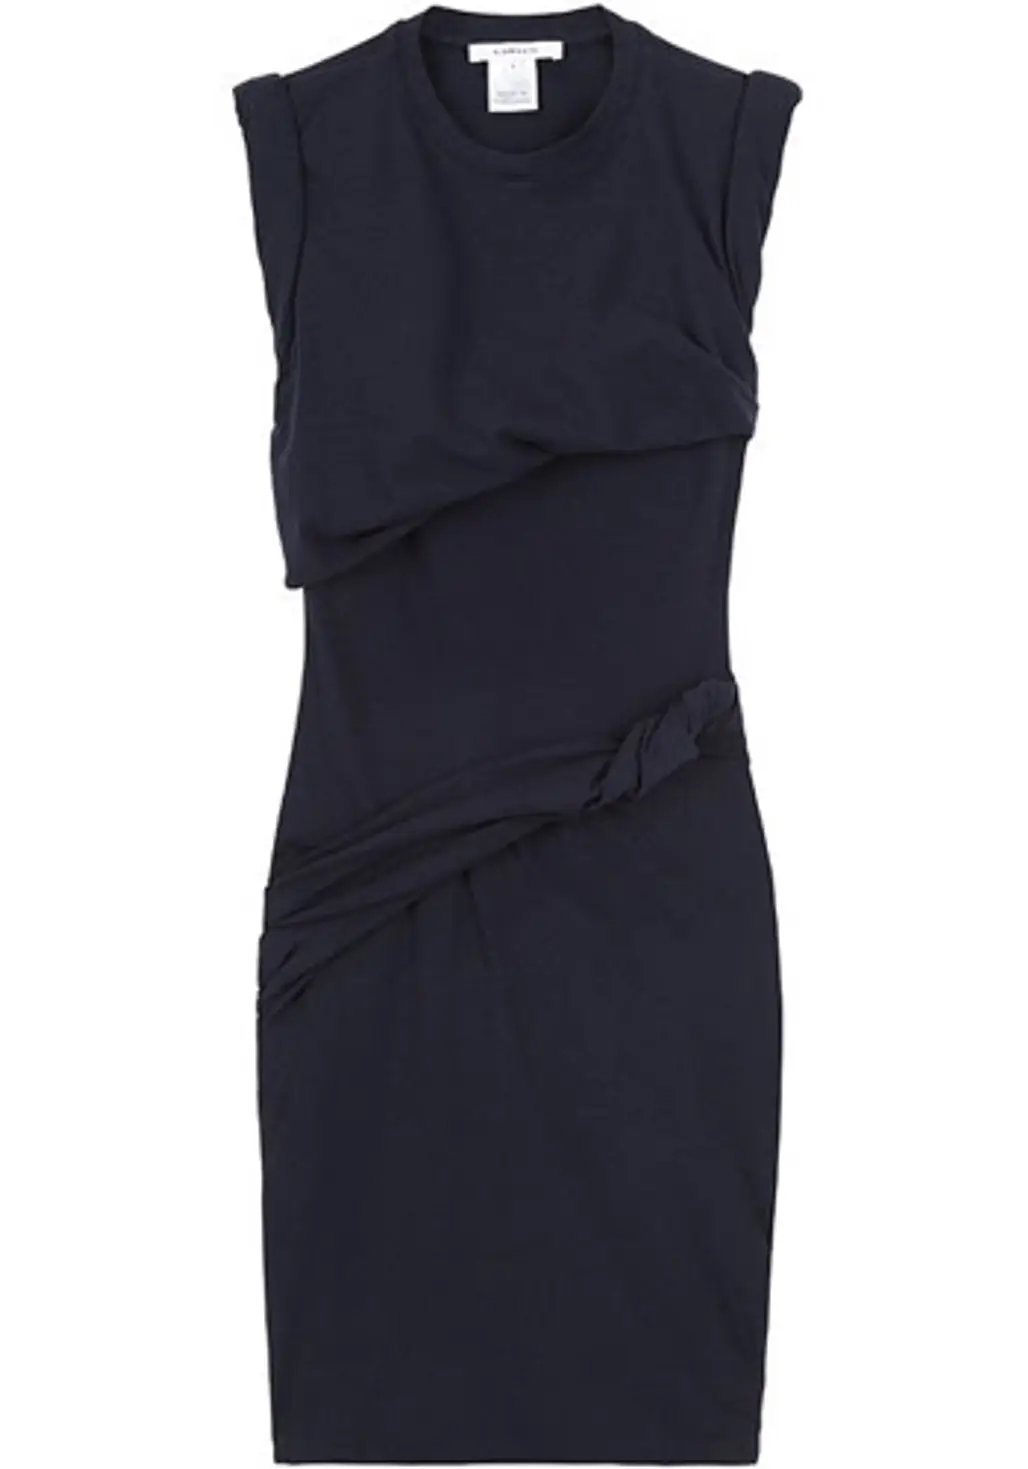 Carven Draped Muscle Sleeve Dress